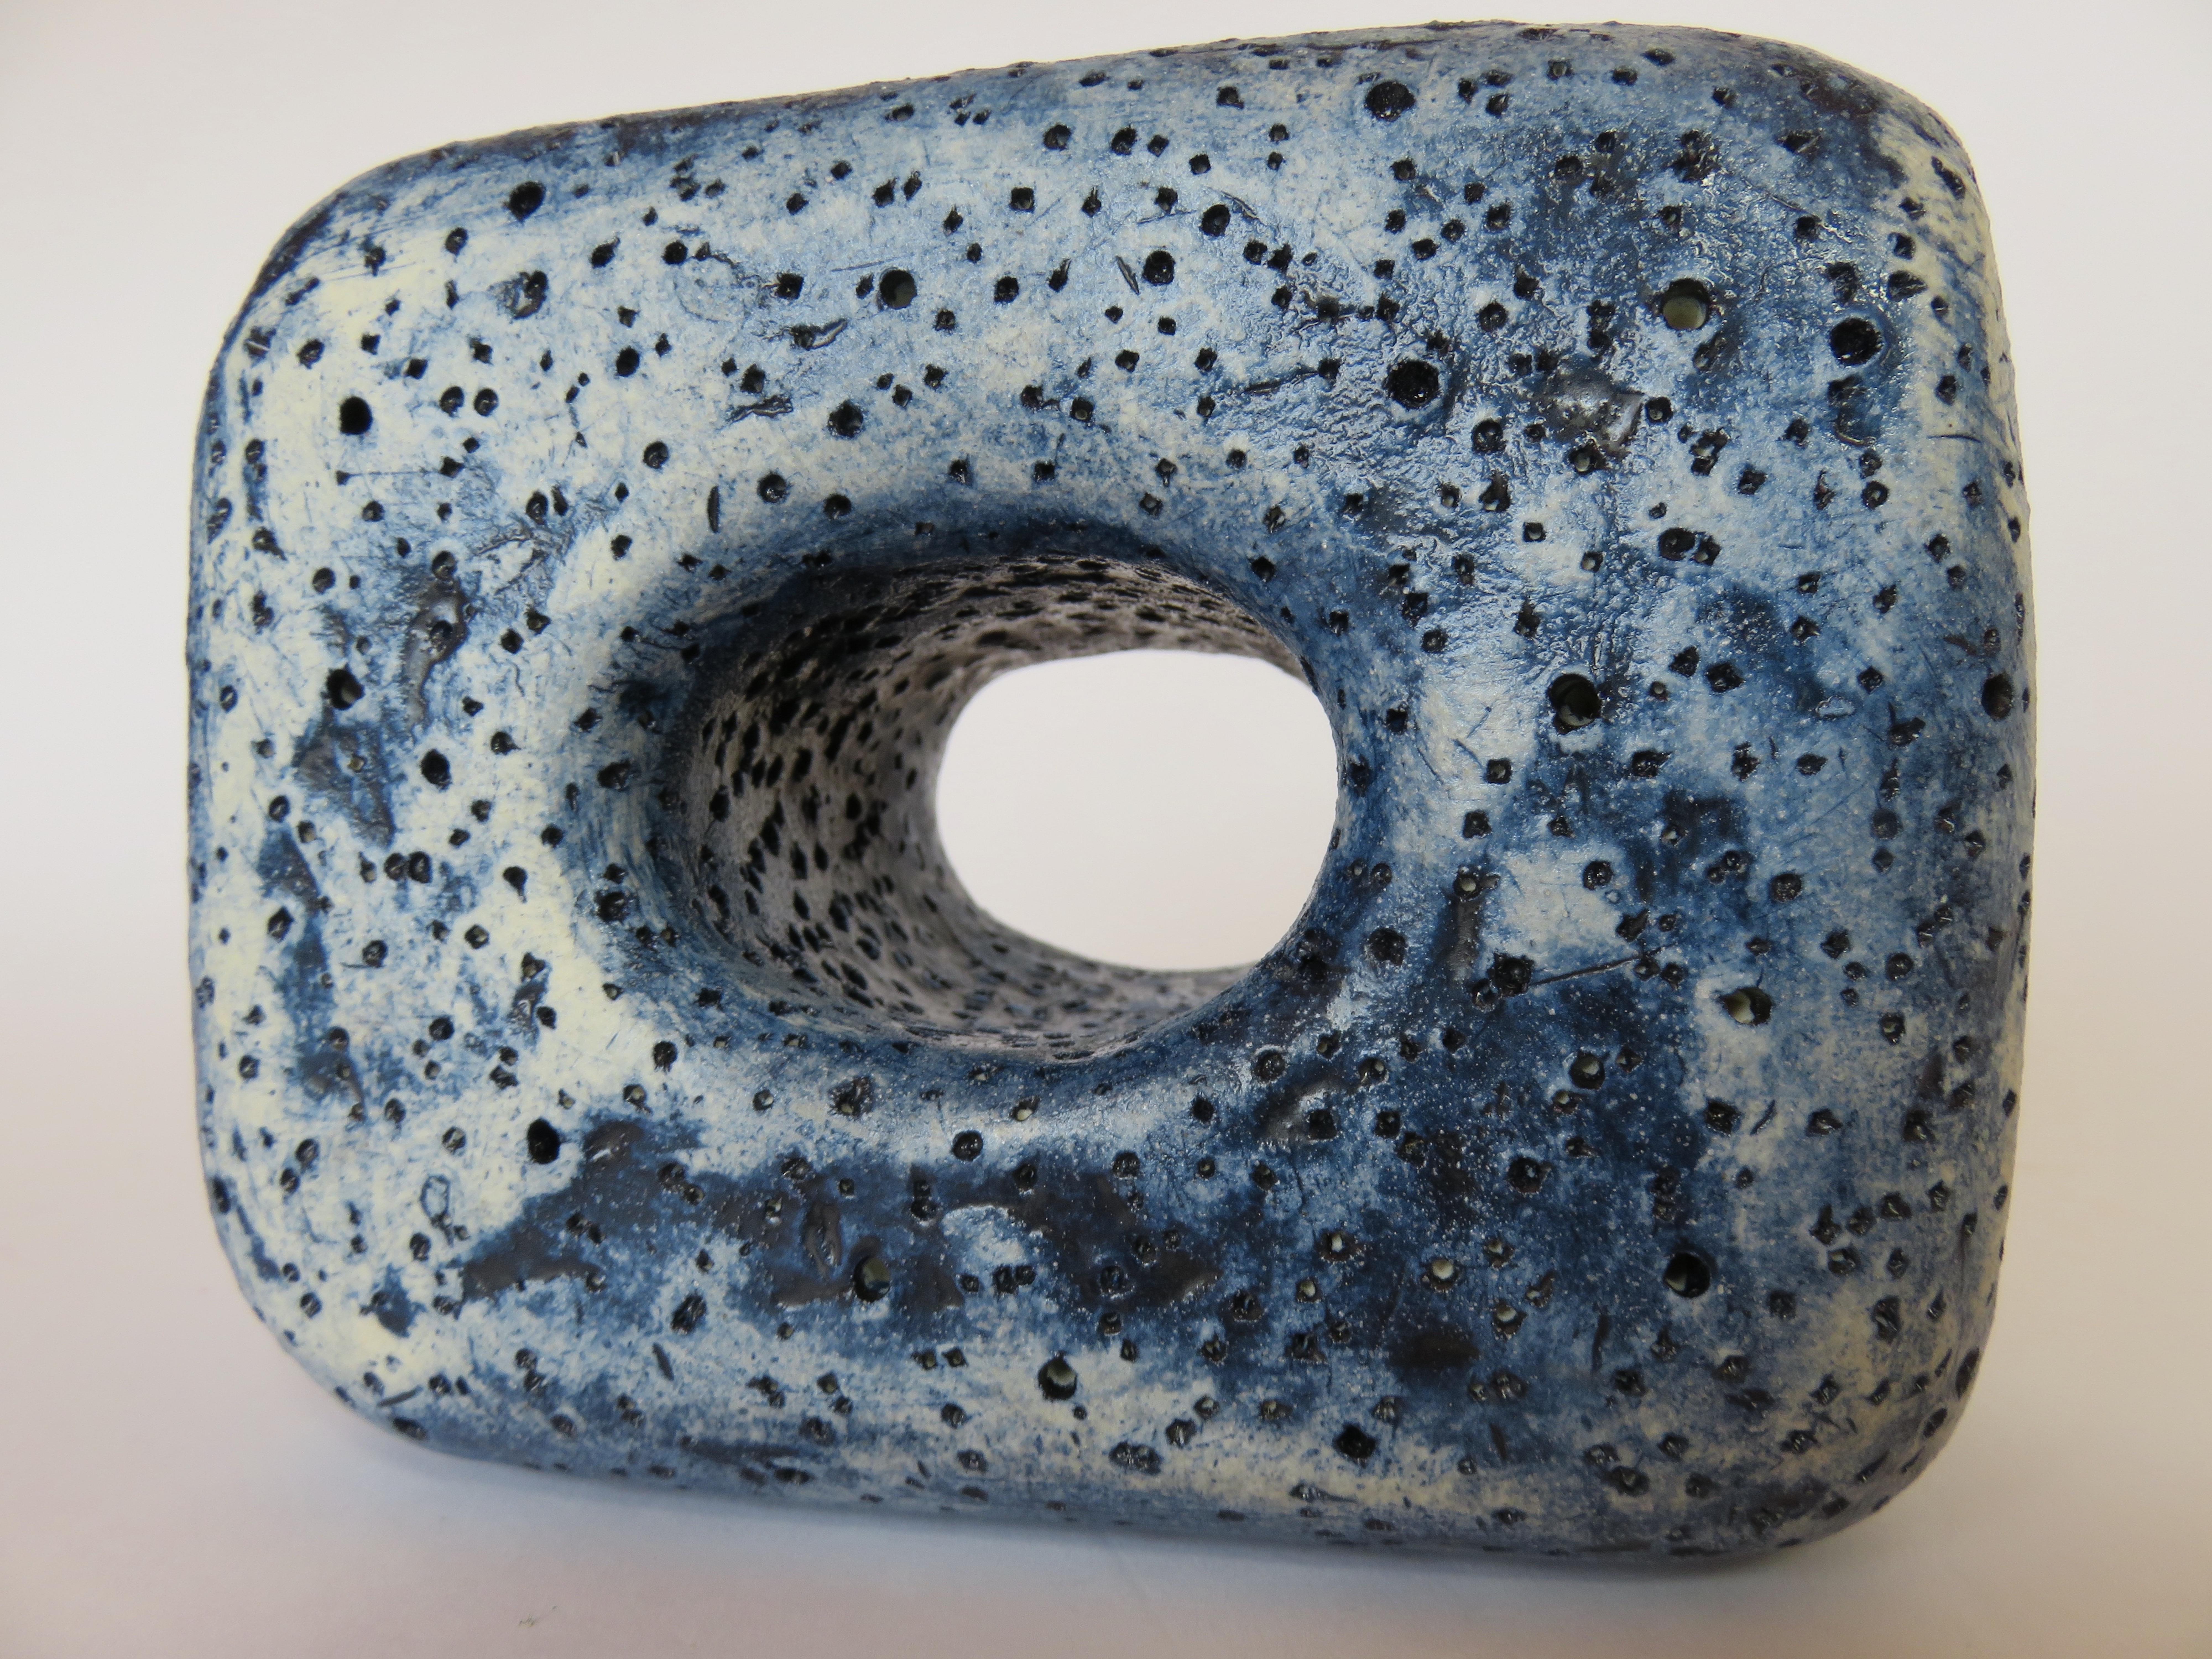 Hand Textured Ceramic Sculpture, Oblong Cube with Oval Opening in Deep Blue Wash 4